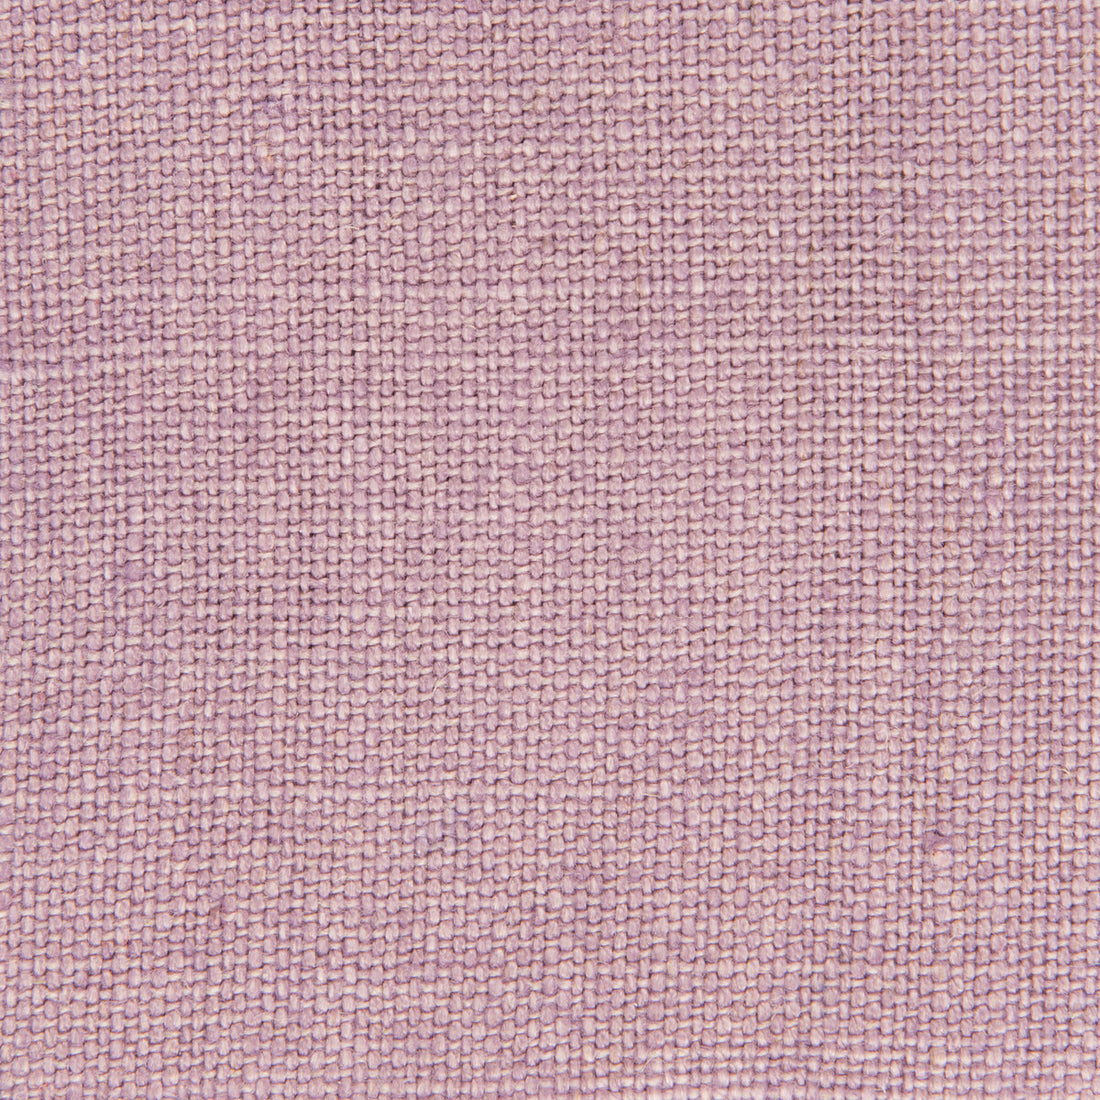 Nicaragua fabric in lavanda color - pattern GDT5239.001.0 - by Gaston y Daniela in the Basics collection